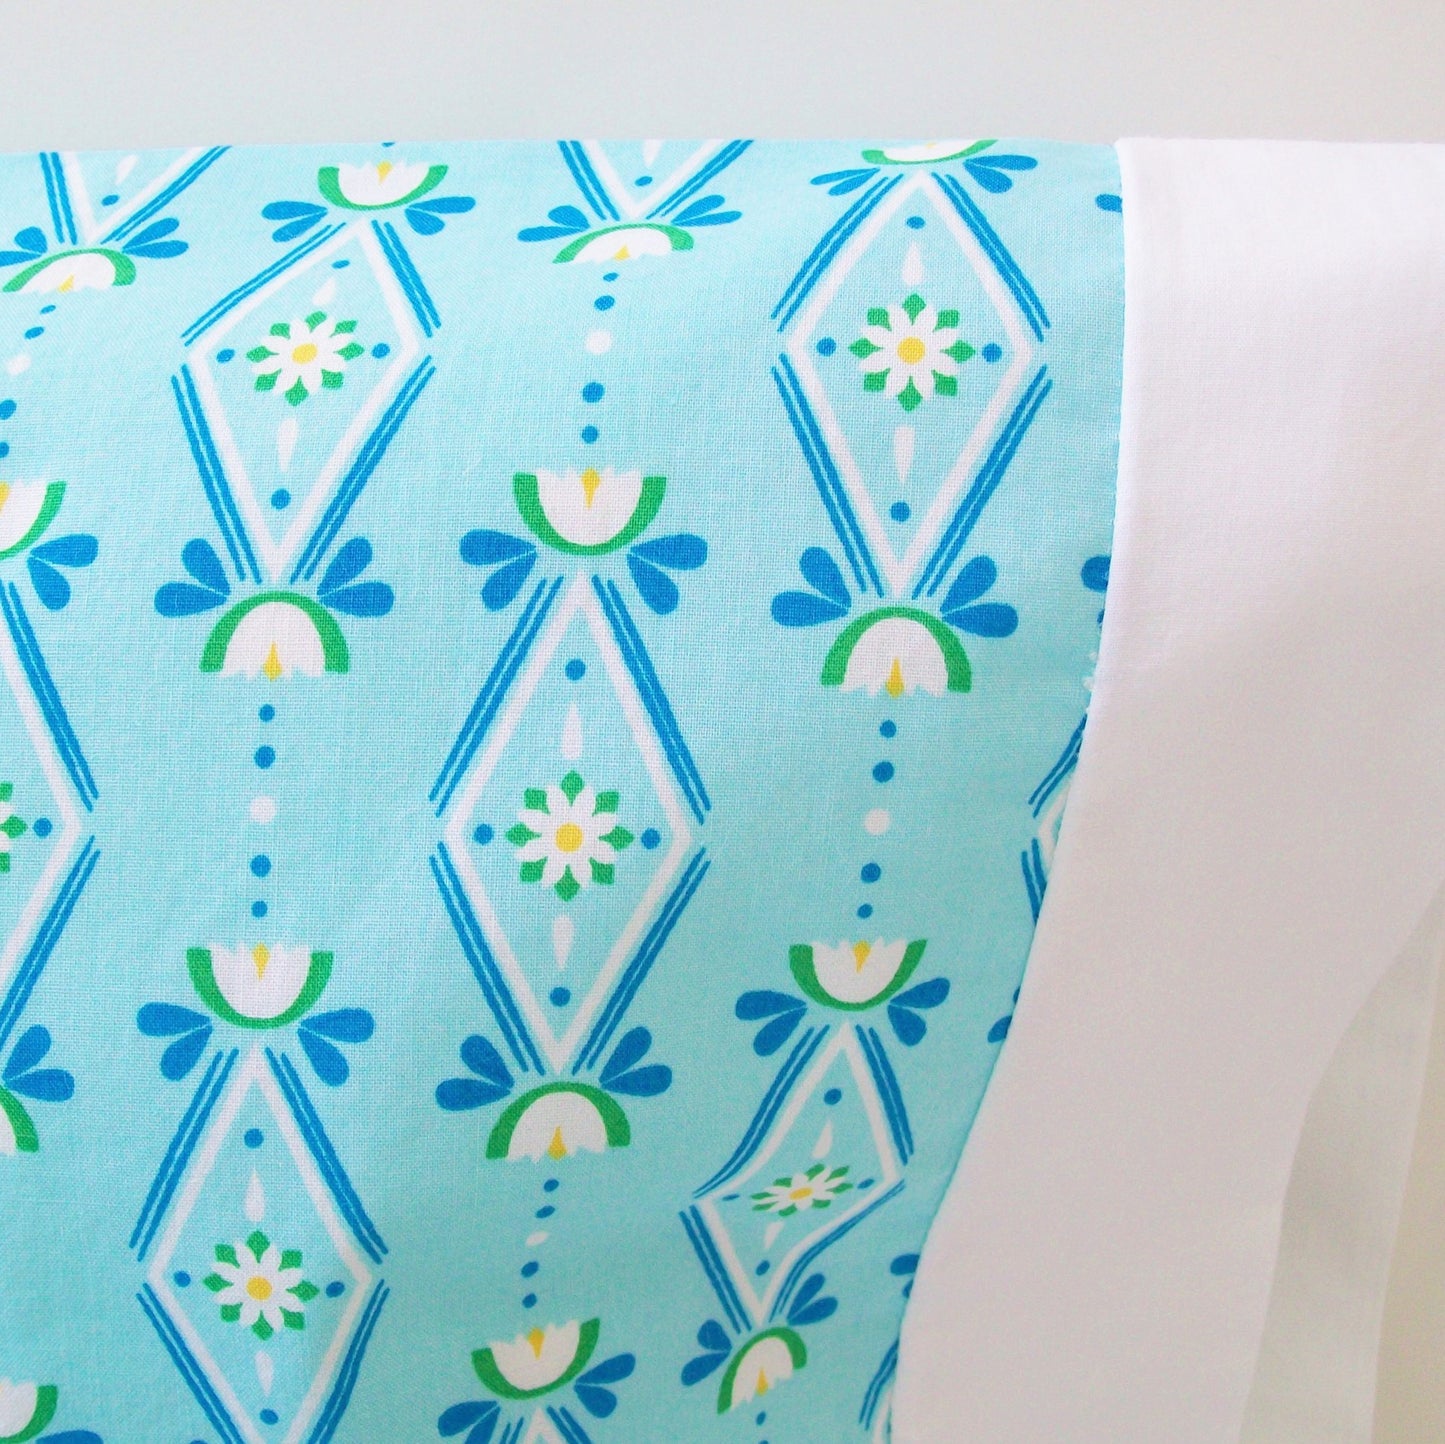 Vintage Style Floral Pillowcase in Organic Cotton